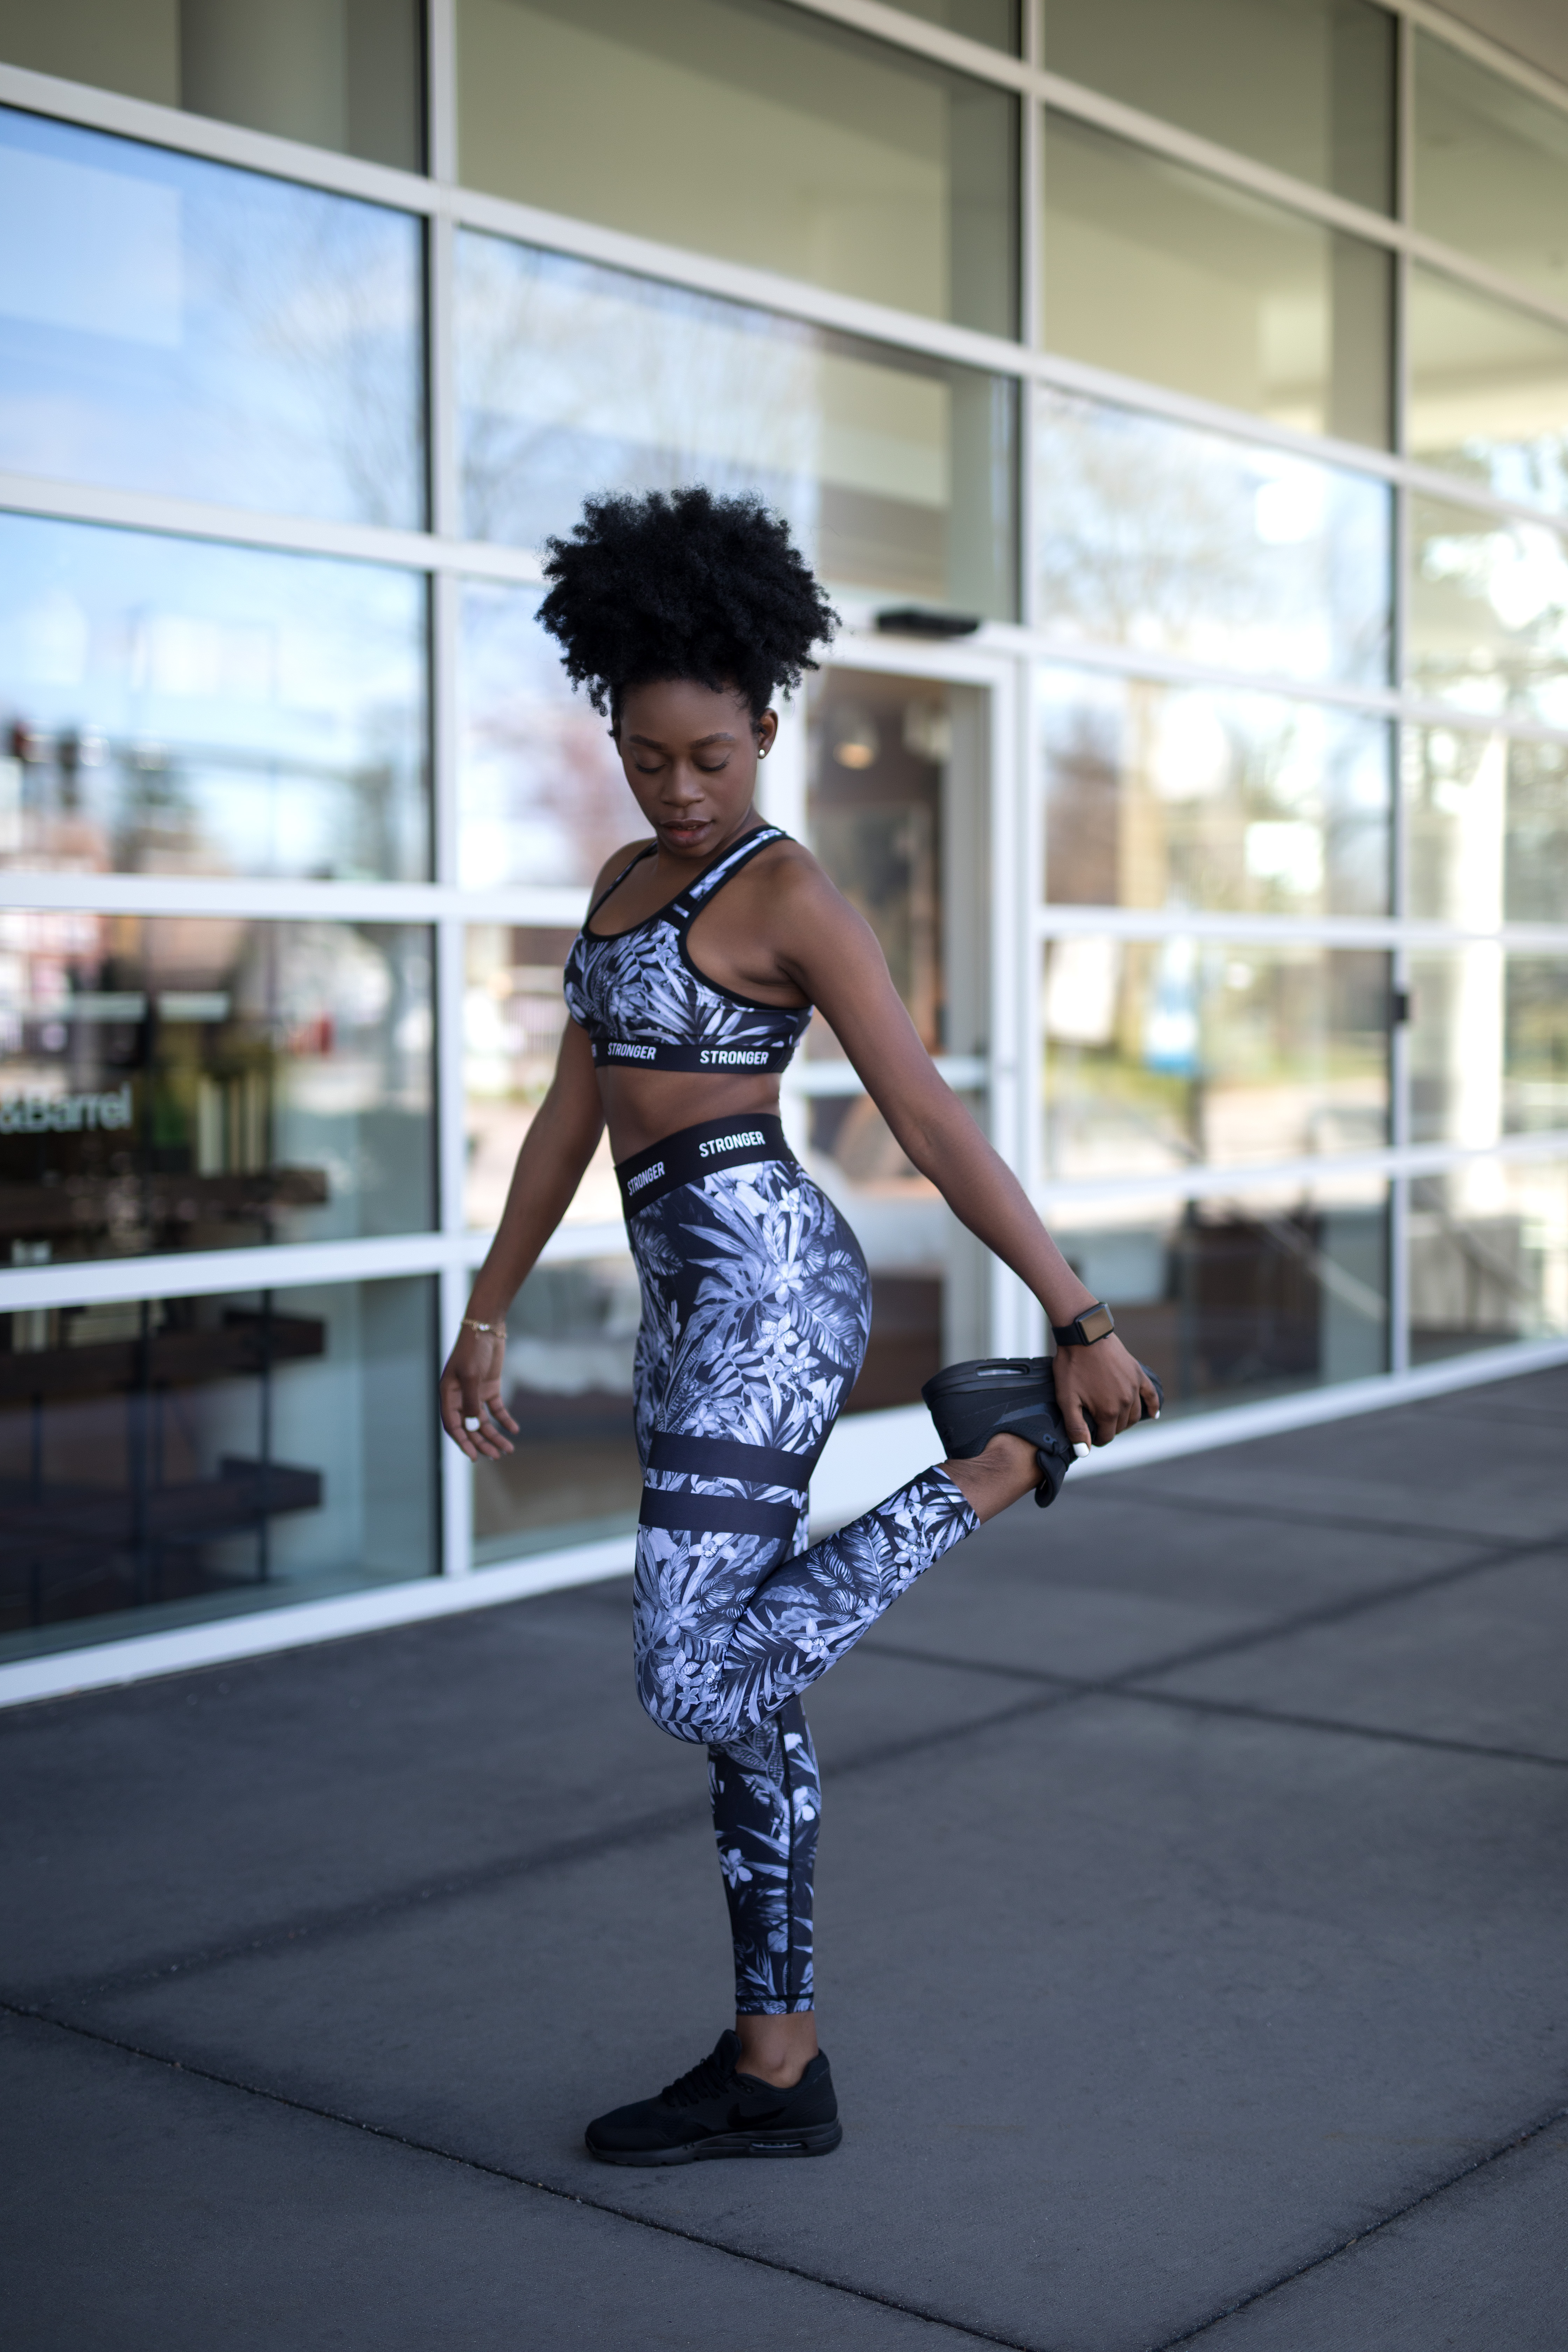 5 PRINTED TIGHTS THAT MAKE YOU WANT TO HIT THE GYM